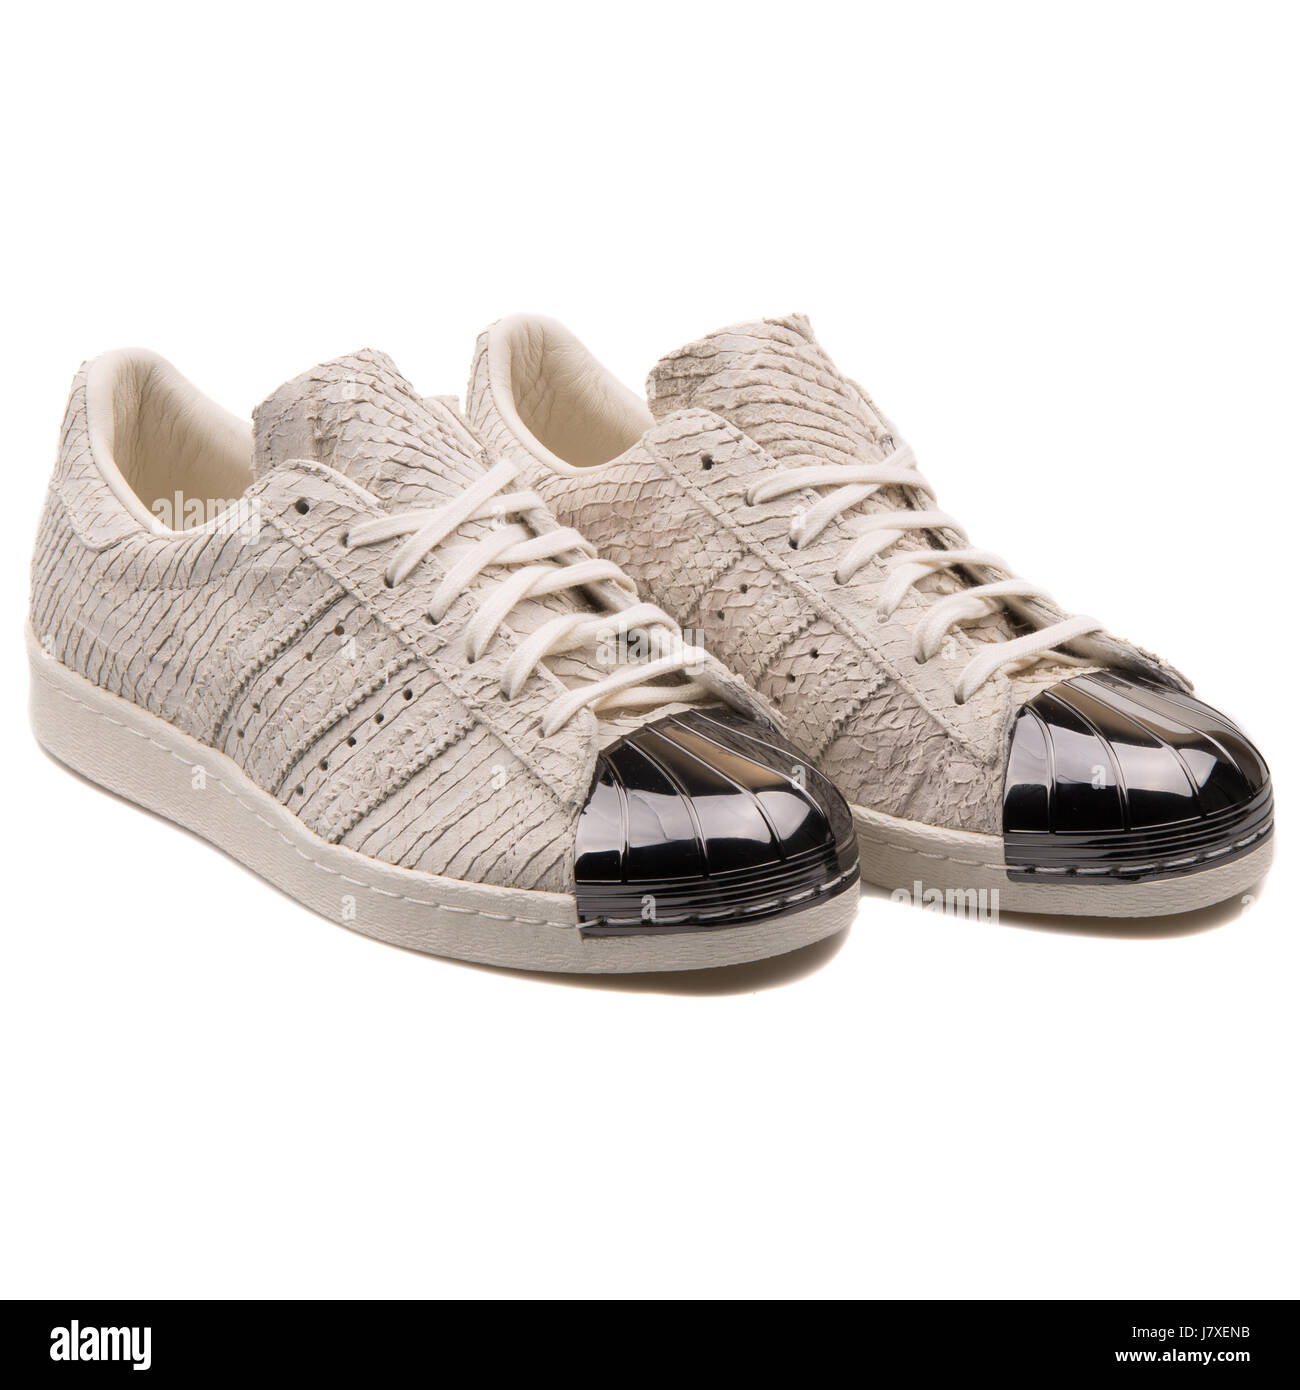 Adidas Superstar 80S Metal Toe W Women's Classic White Leather 